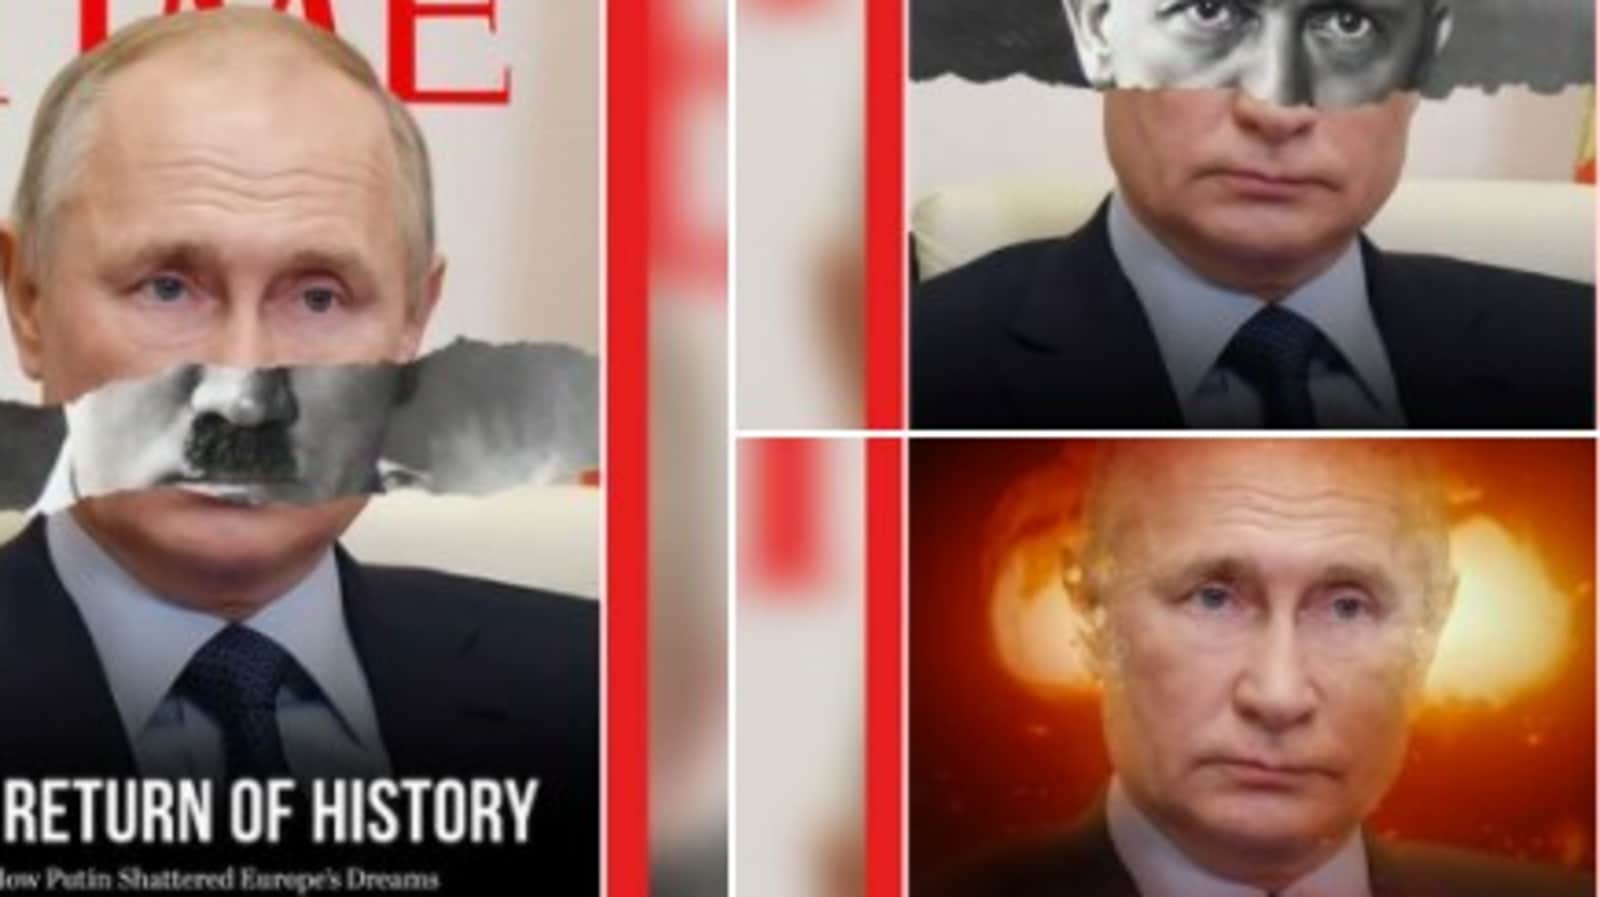 The Time cover that wasn't on Russia offensive: Putin + Hitler moustache |  World News - Hindustan Times